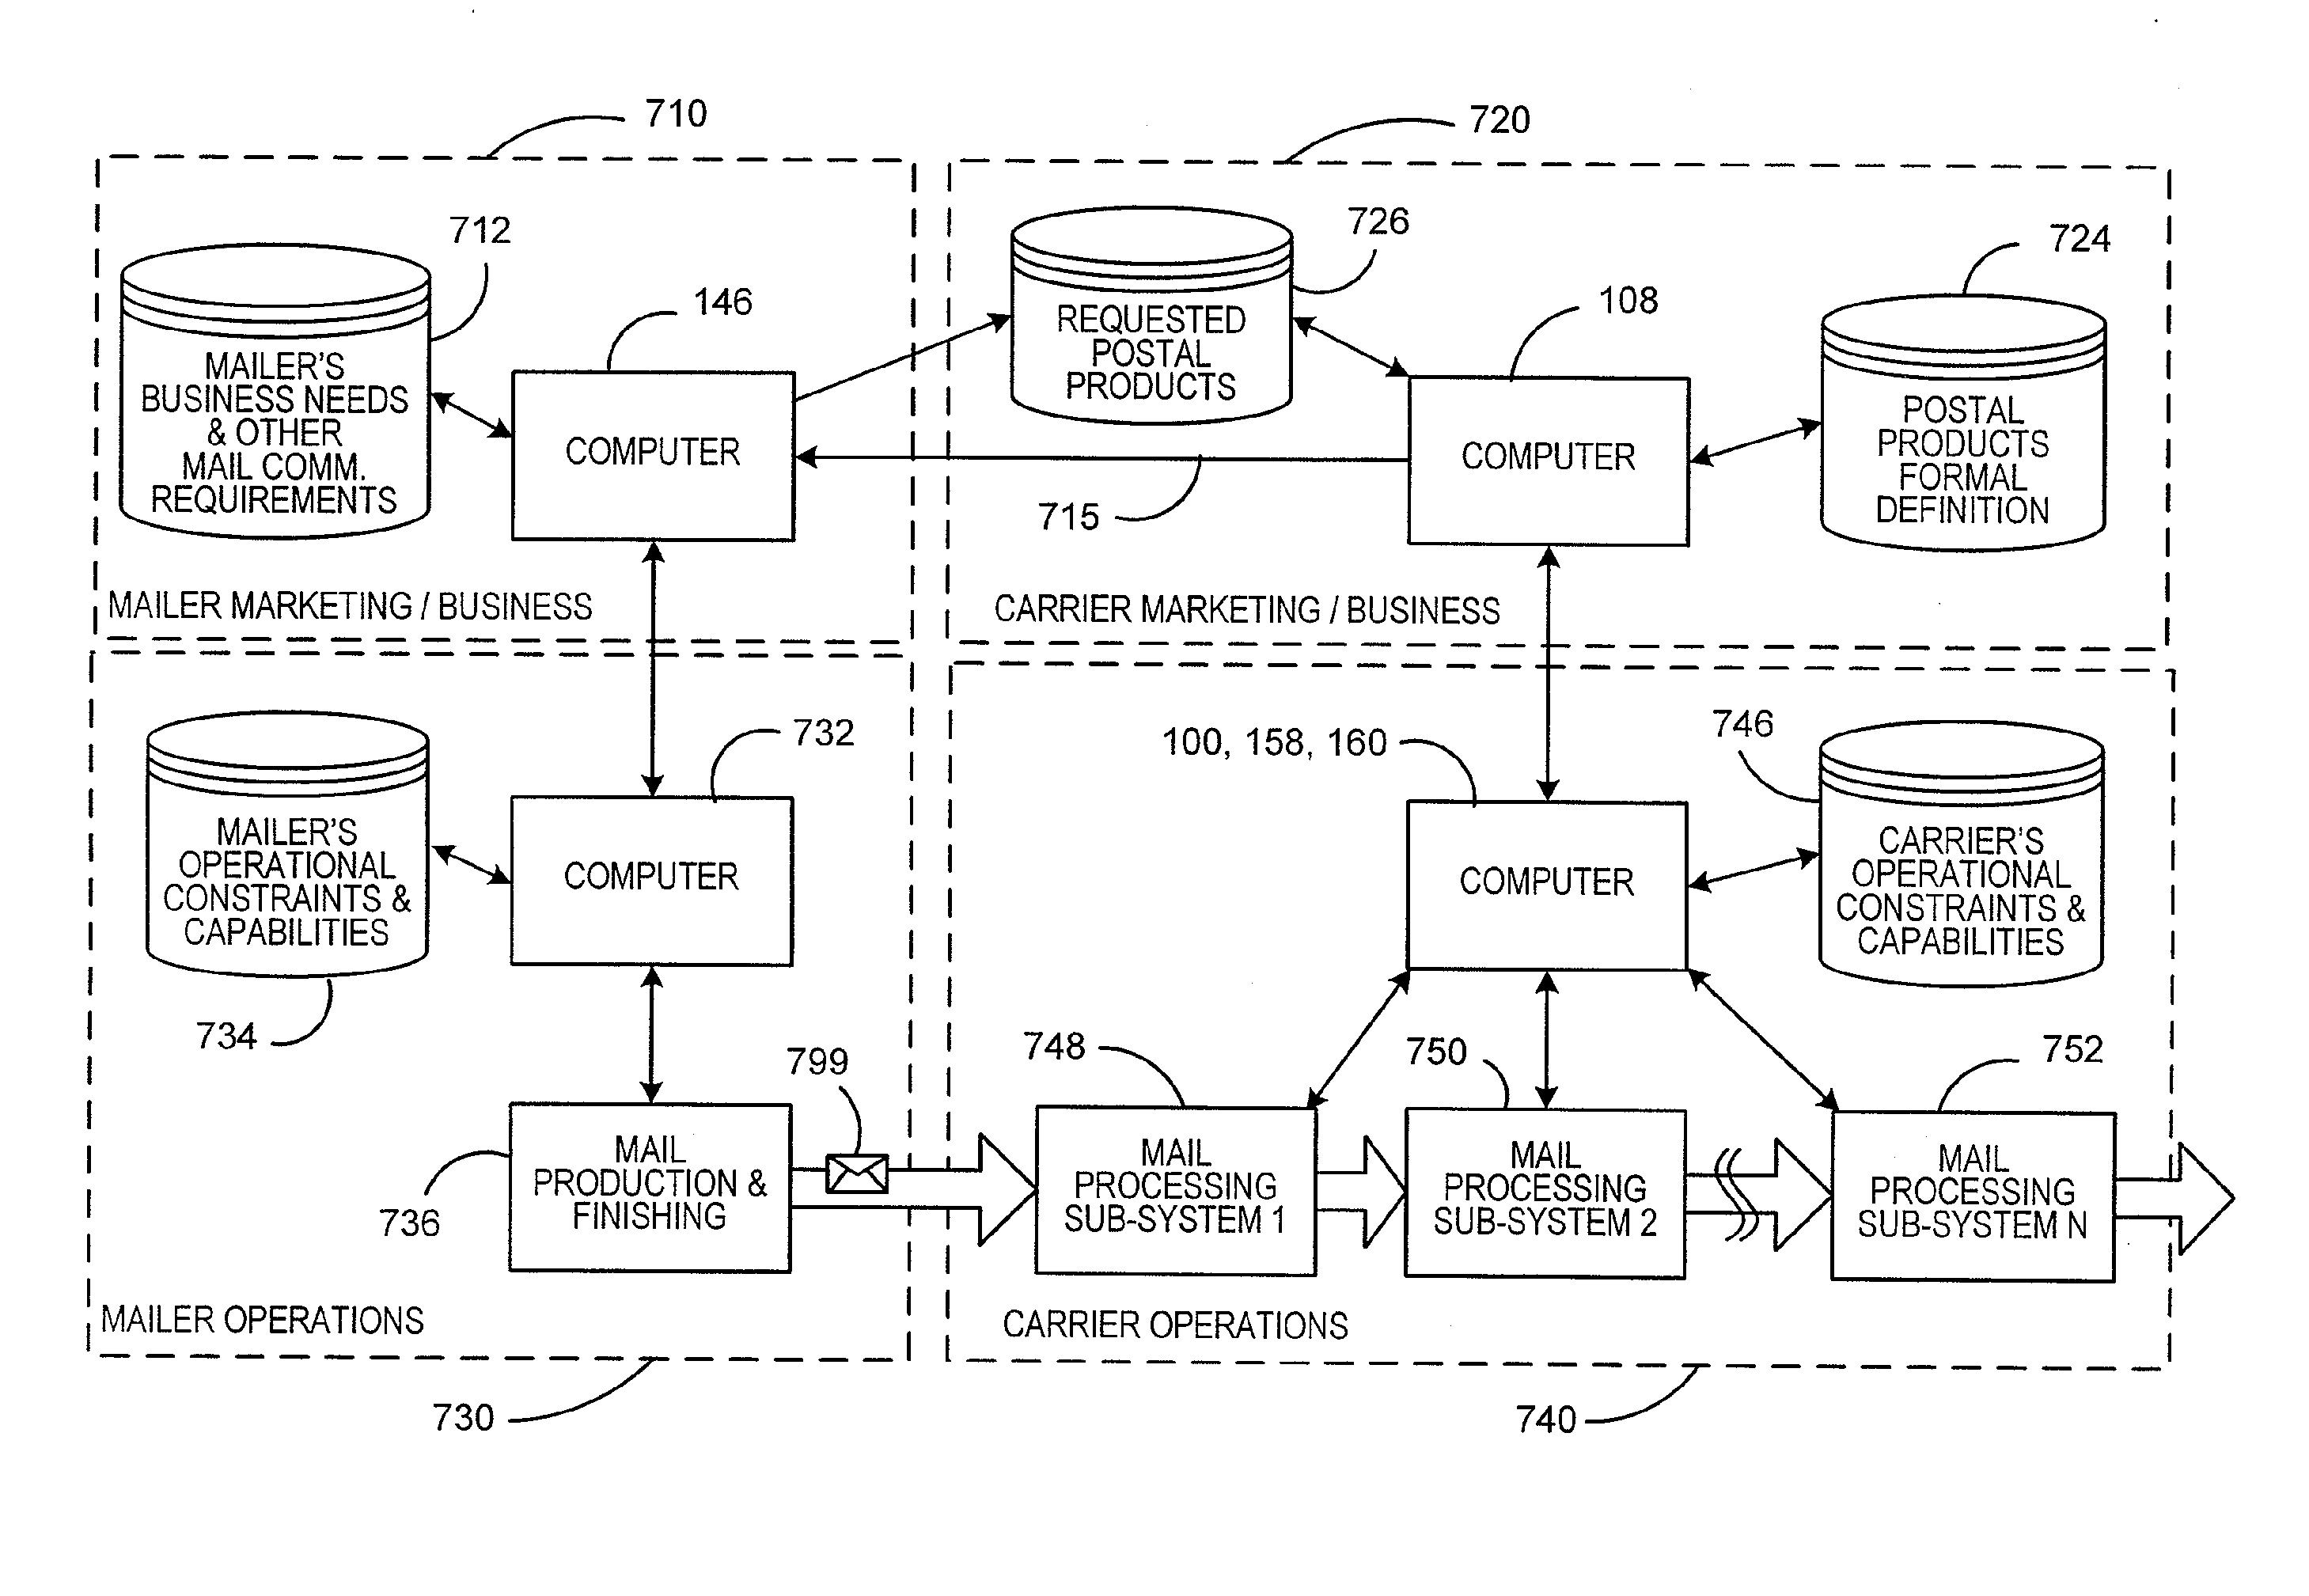 Method for creating and delivering new carrier products